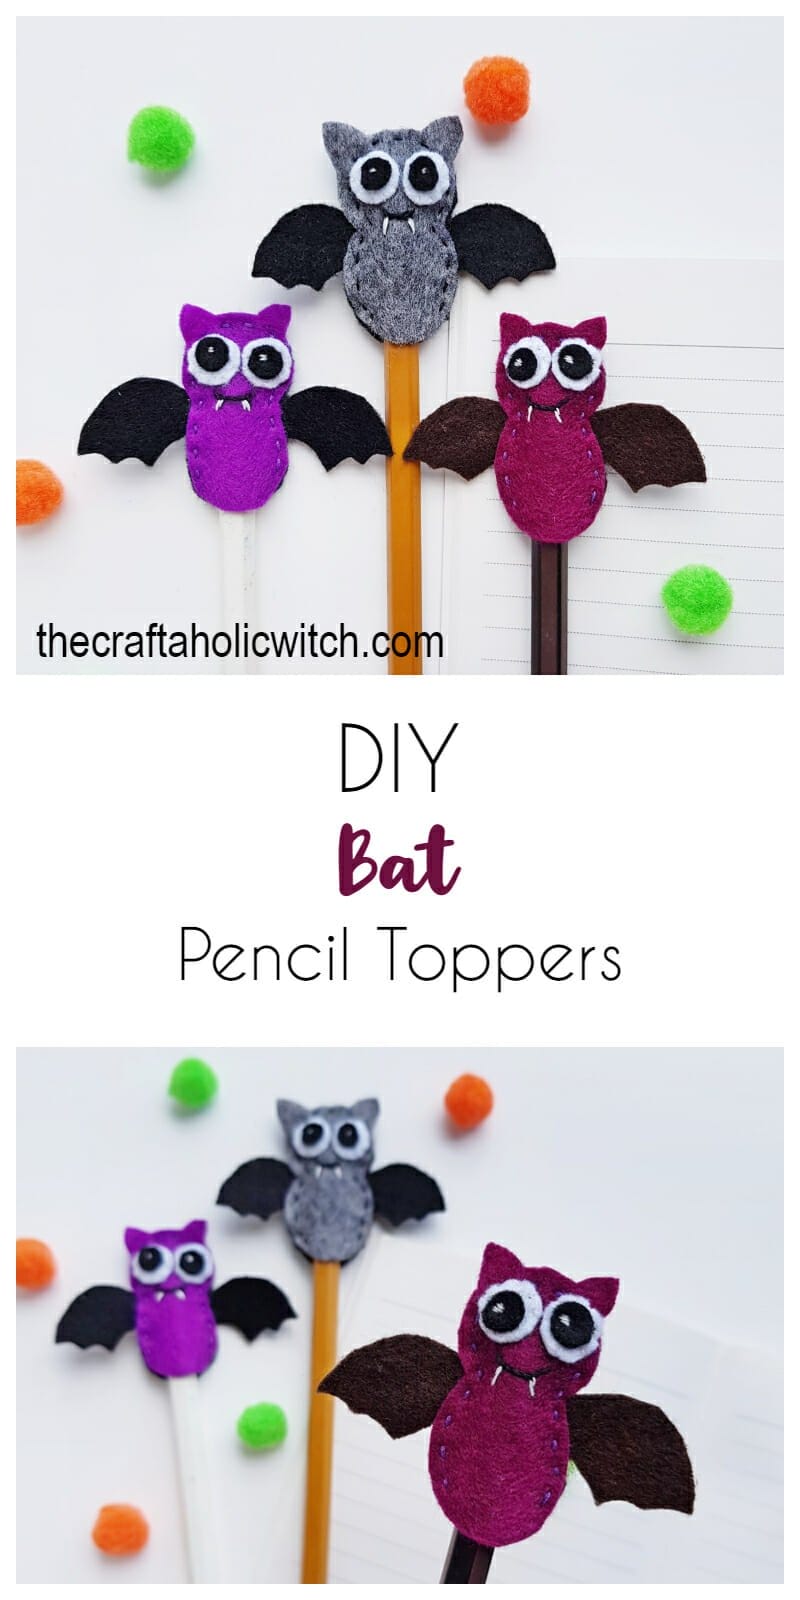 DIY Pencil Toppers: Two Easy Tutorials with Free Patterns